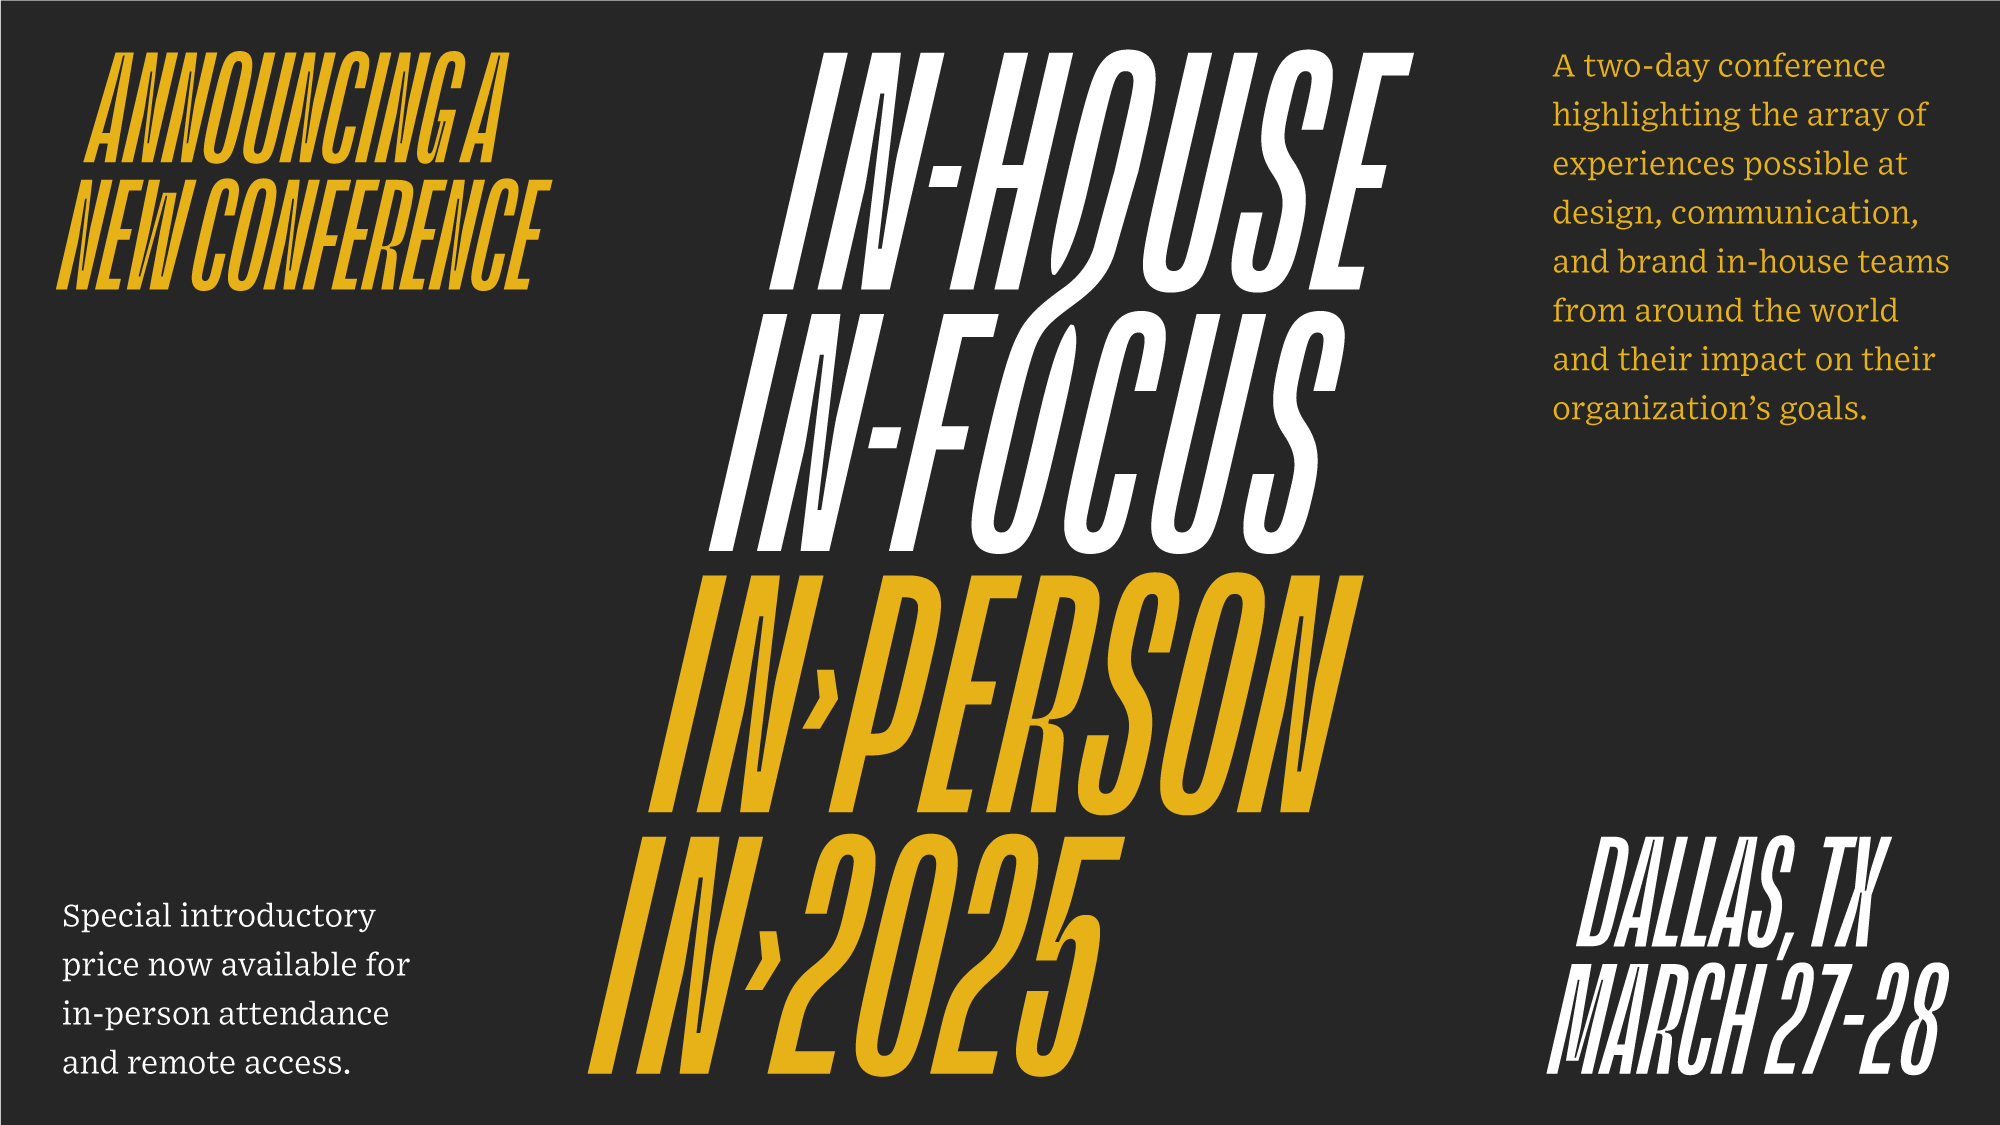 New Conference! In-house In-focus In-person In 2025